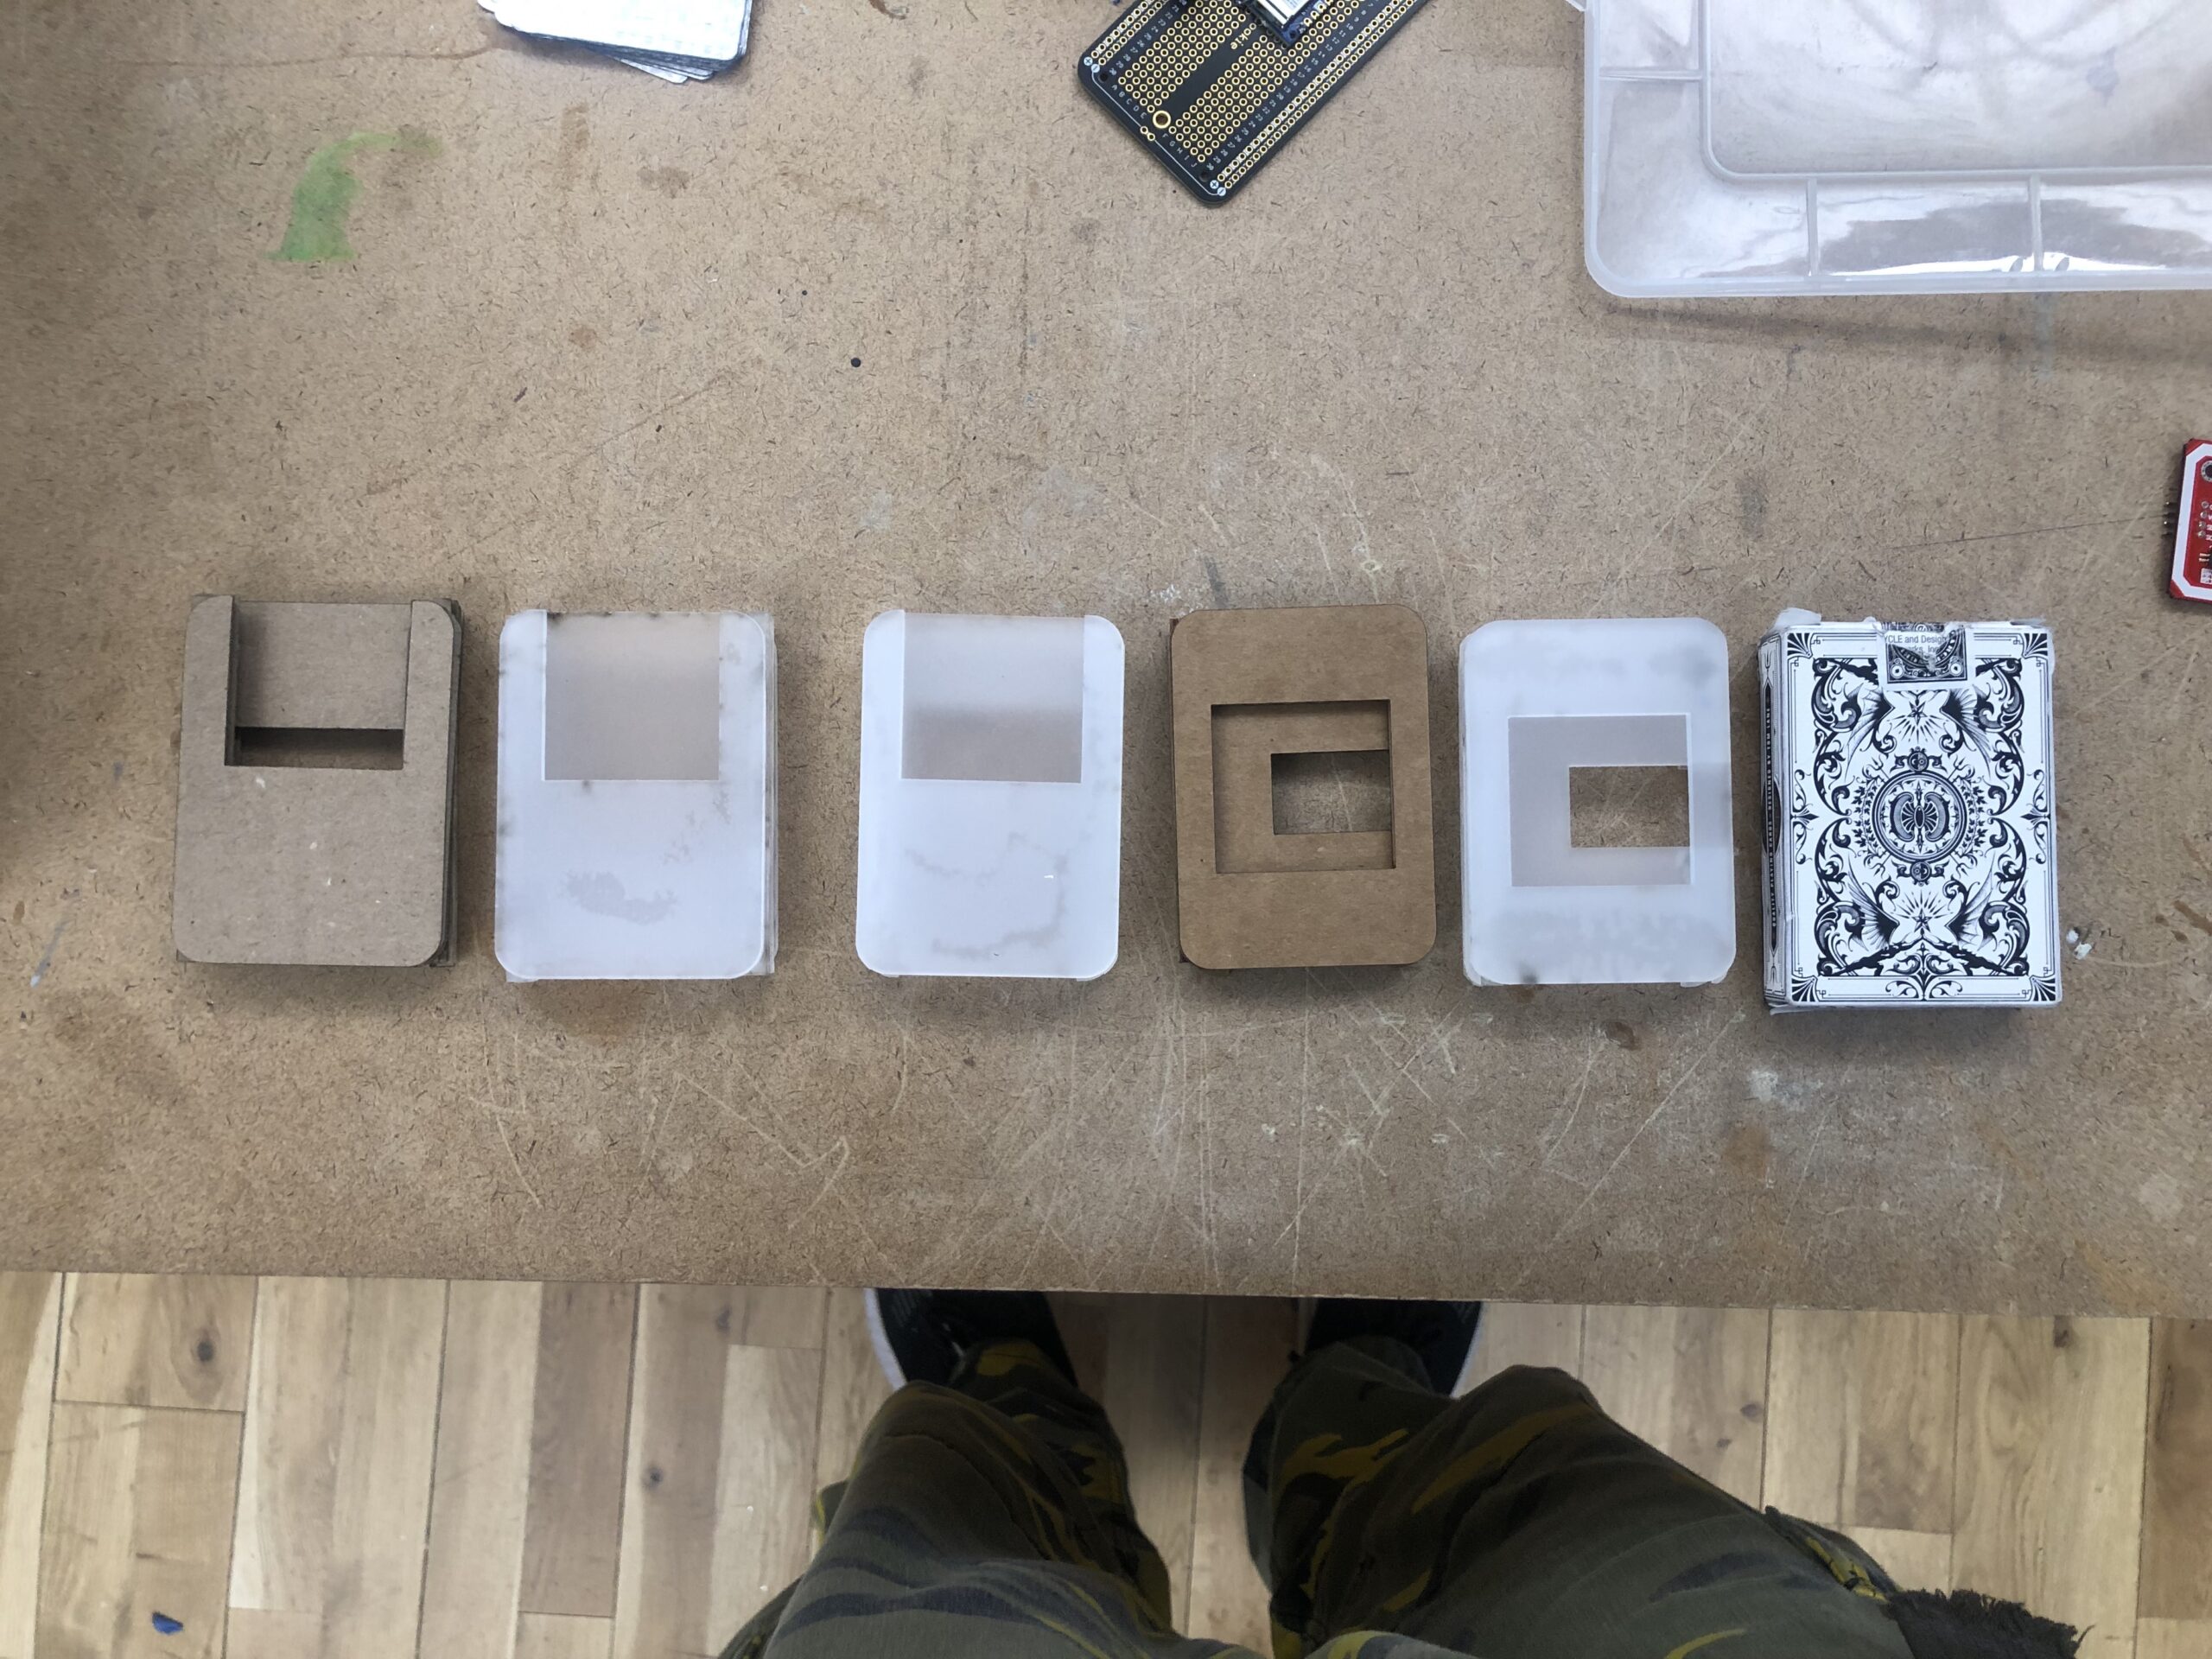 Six different version of the original body lined up side to side. 1 and 4 are cardboard drafts. 2,3, and 5 are acrylic drafts and 6 is just the box itself